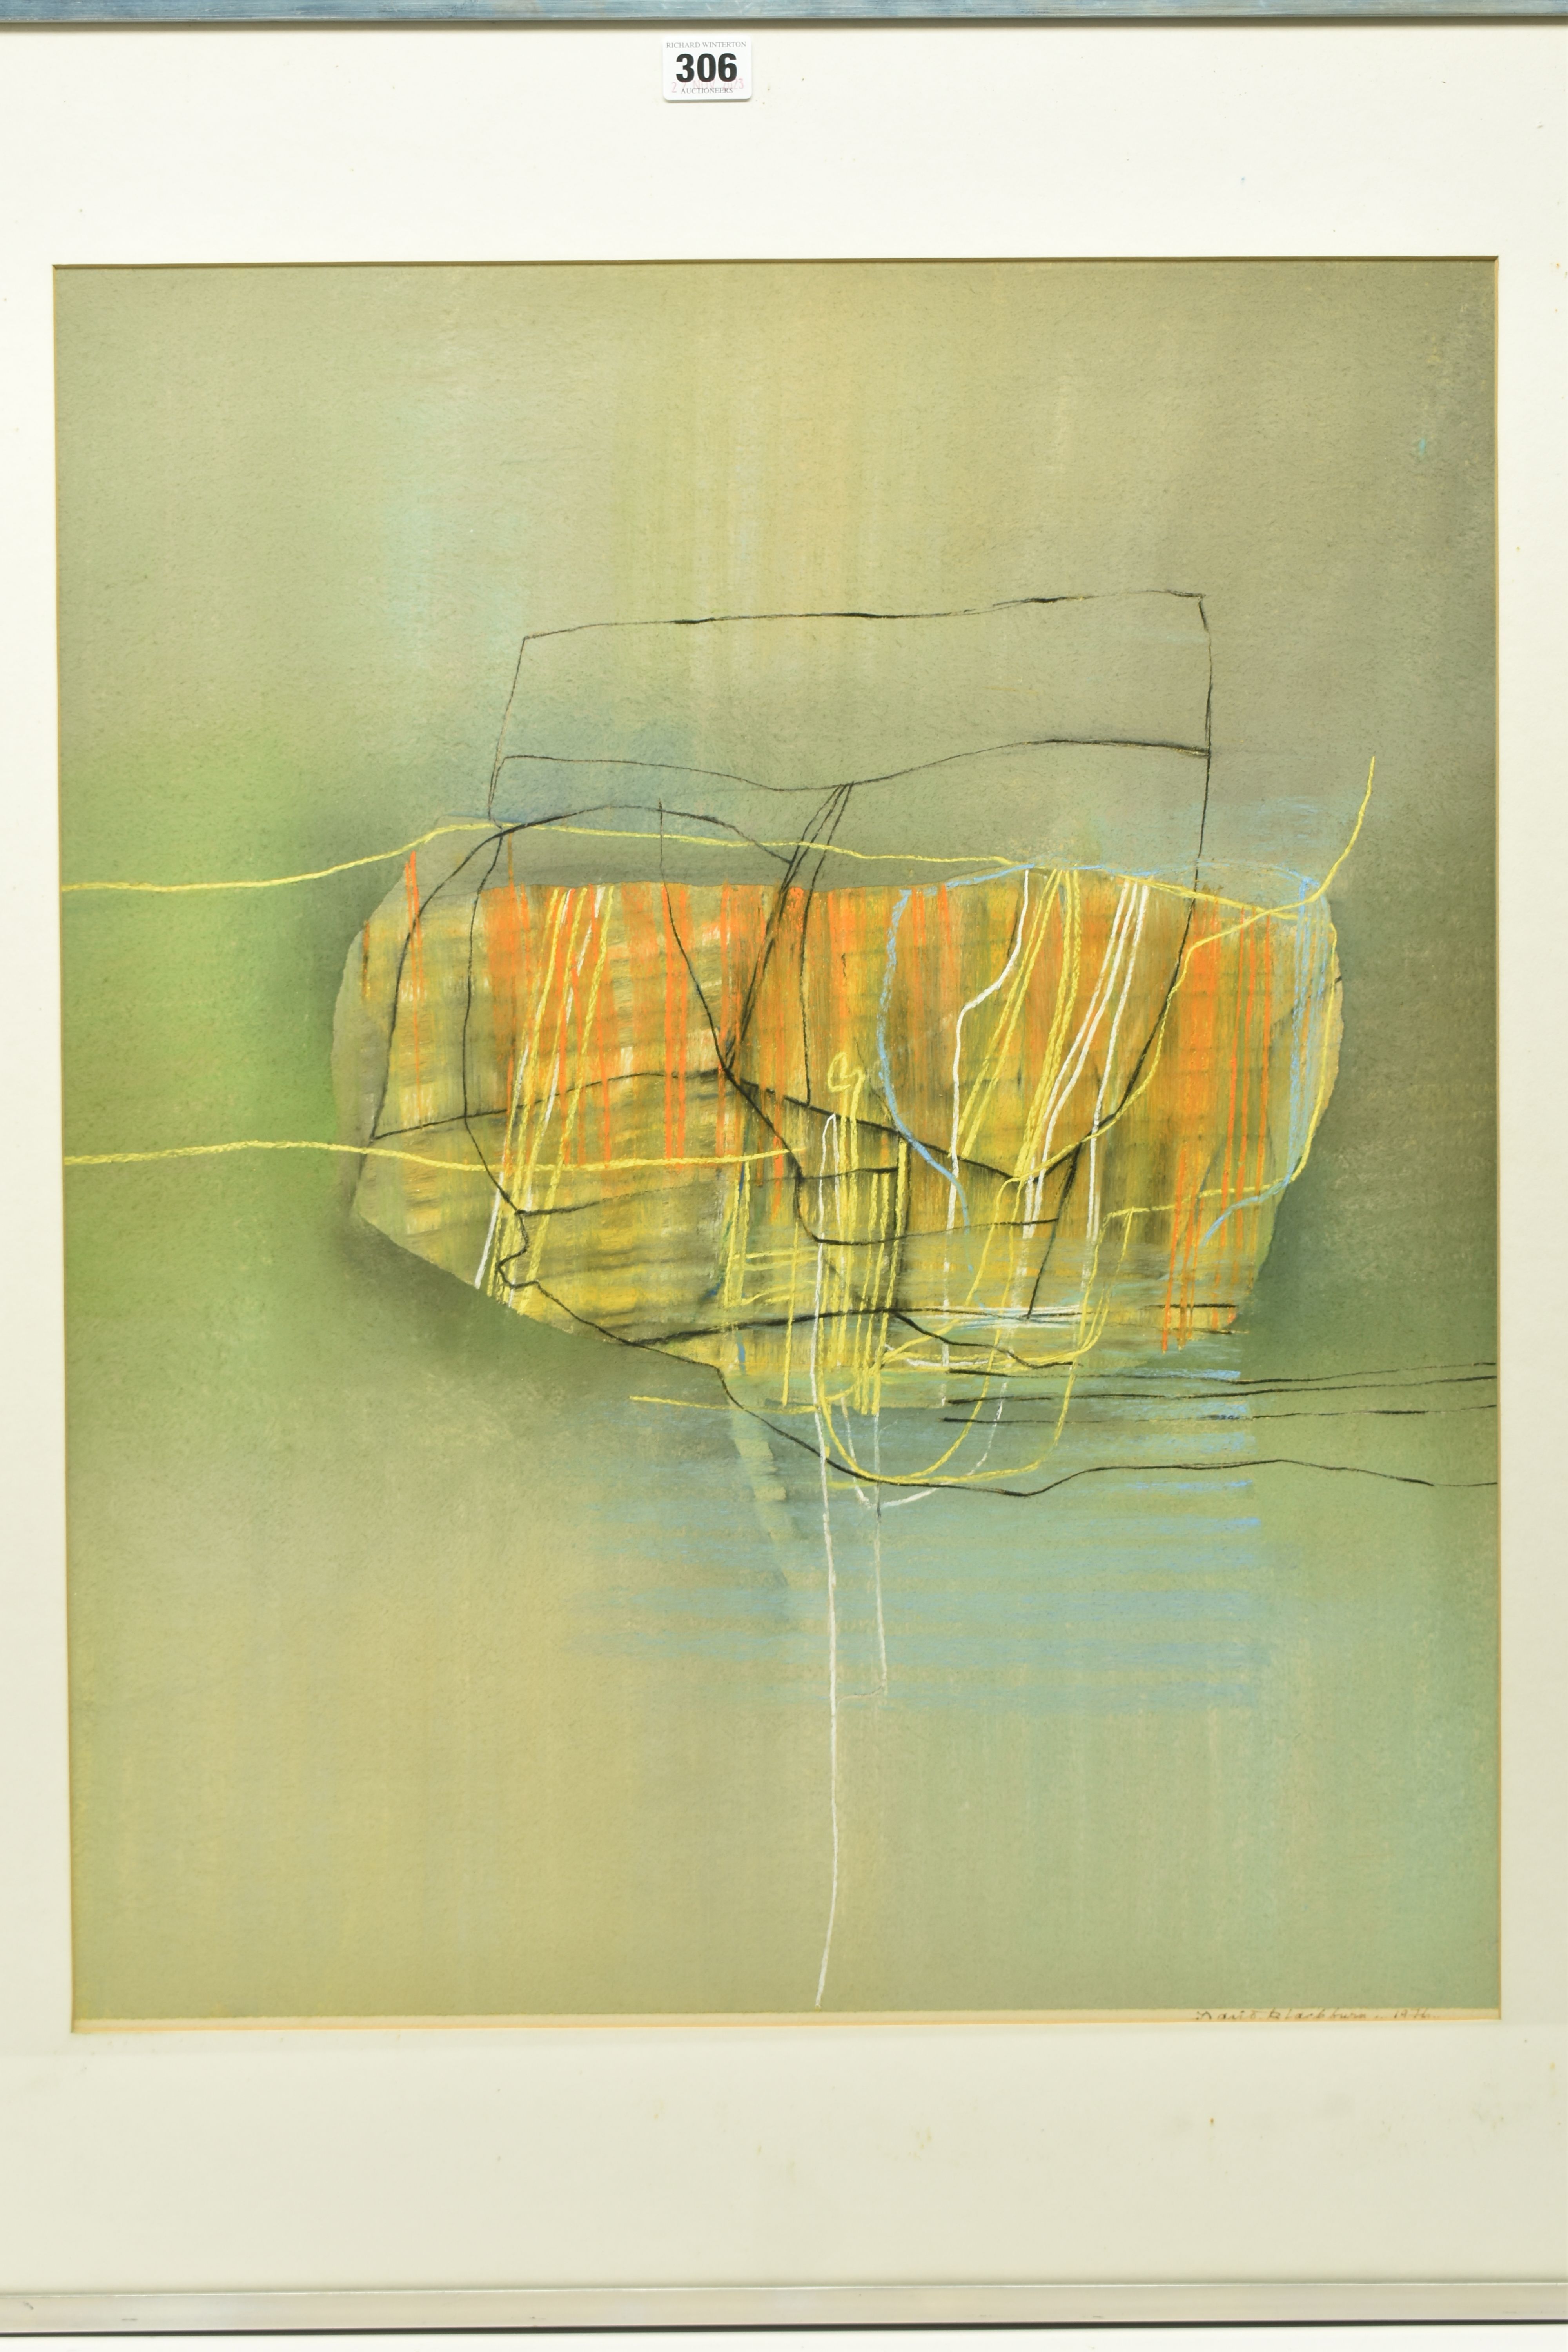 DAVID BLACKBURN (1939-2016) 'SEA GREEN' AN ABSTRACT STUDY, signed and dated 1976 bottom right, - Image 2 of 7